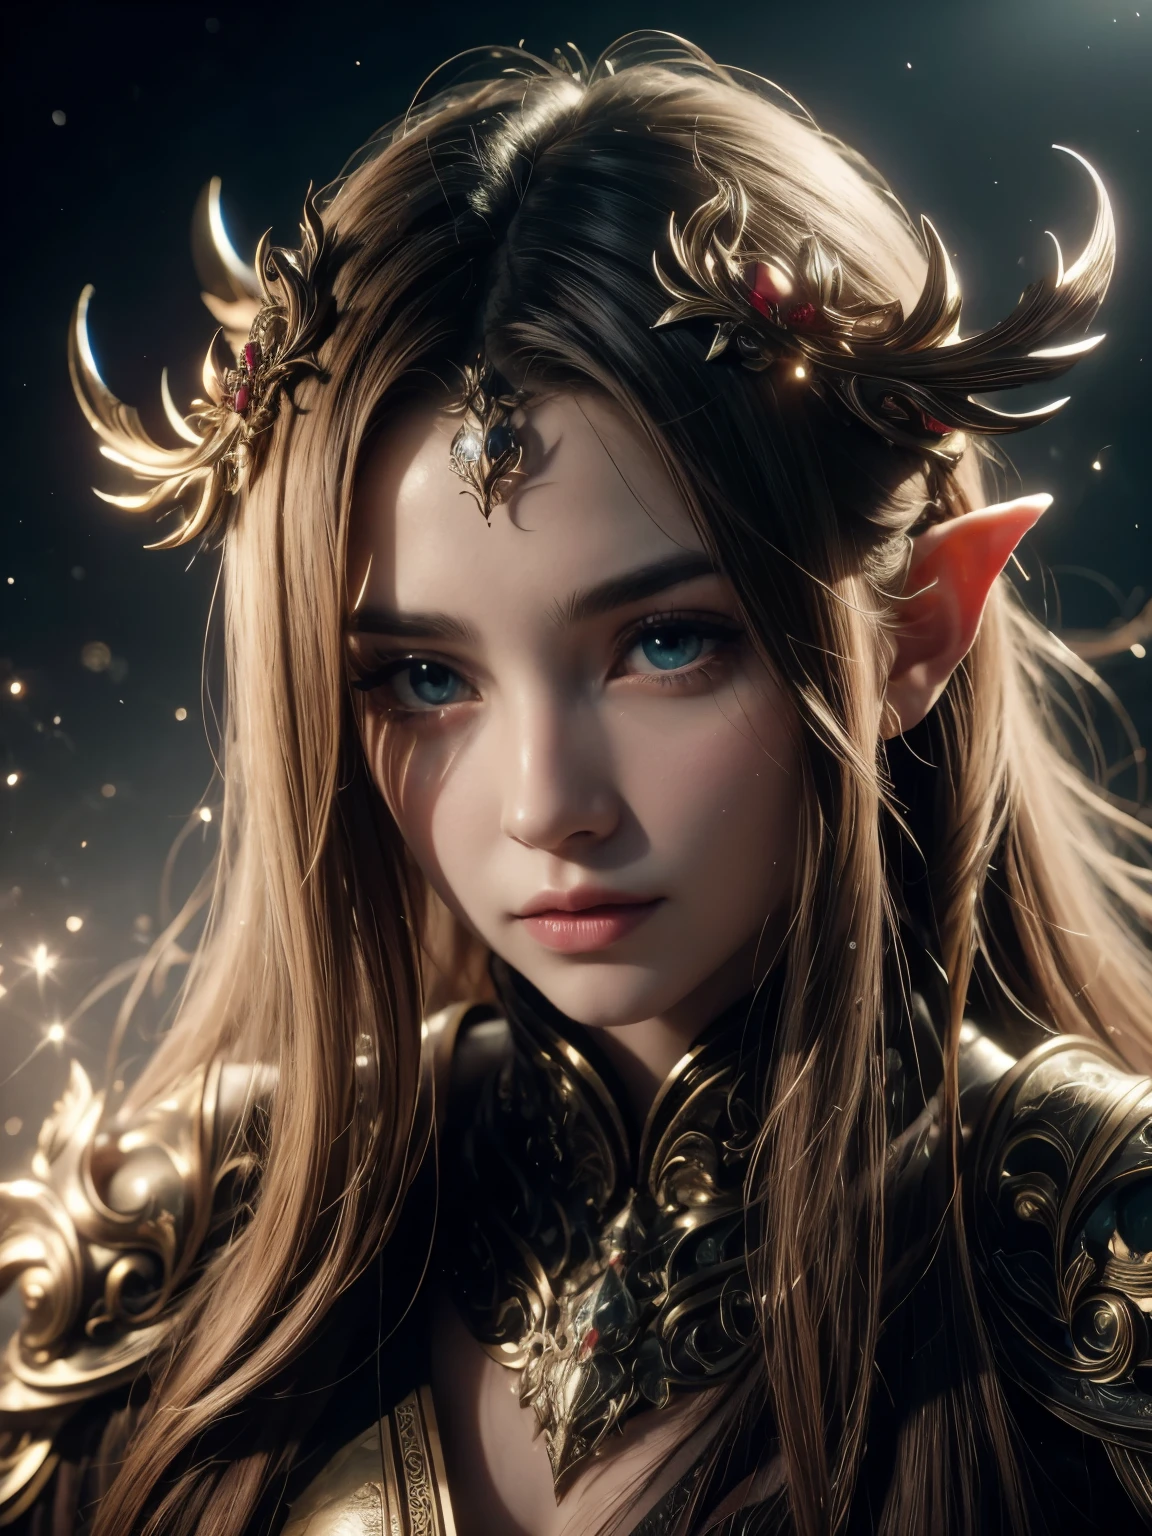 (Best quality, 4k, High-resolution, Masterpiece:1.2), Ultra-detailed, Realistic, Radiant lighting, Epoch Elves, Portraits, Fantastical colors, Fine art, Ethereal beings, Dreamlike, Whimsical creatures, Detailed facial features, Glowing eyes, Elven beauties, Ethereal glow, Mythical creatures, Harmonious composition, Dazzling colors, Stunning visual effects, Otherworldly appearance, Mesmerizing artistry, 